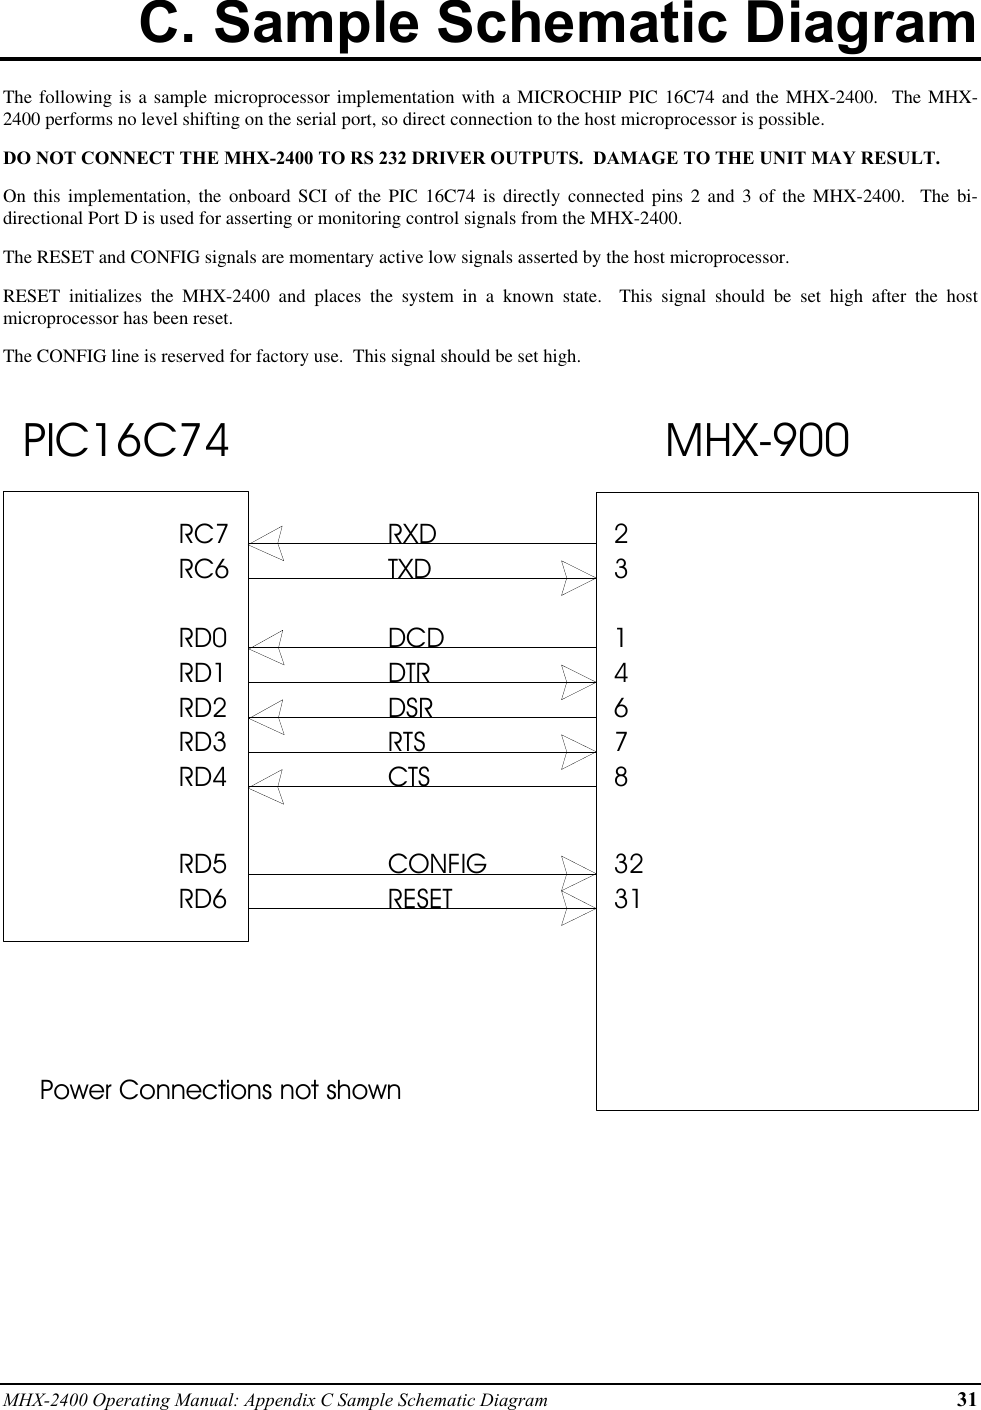 MHX-2400 Operating Manual: Appendix C Sample Schematic Diagram 31C. Sample Schematic DiagramThe following is a sample microprocessor implementation with a MICROCHIP PIC 16C74 and the MHX-2400.  The MHX-2400 performs no level shifting on the serial port, so direct connection to the host microprocessor is possible.DO NOT CONNECT THE MHX-2400 TO RS 232 DRIVER OUTPUTS.  DAMAGE TO THE UNIT MAY RESULT.On this implementation, the onboard SCI of the PIC 16C74 is directly connected pins 2 and 3 of the MHX-2400.  The bi-directional Port D is used for asserting or monitoring control signals from the MHX-2400.The RESET and CONFIG signals are momentary active low signals asserted by the host microprocessor.RESET initializes the MHX-2400 and places the system in a known state.  This signal should be set high after the hostmicroprocessor has been reset.The CONFIG line is reserved for factory use.  This signal should be set high.RXDTXDDCDDTRDSRRTSCTSCONFIGRESETPIC16C74 MHX-90023146783231Power Connections not shownRC7RC6RD0RD1RD2RD3RD4RD5RD6